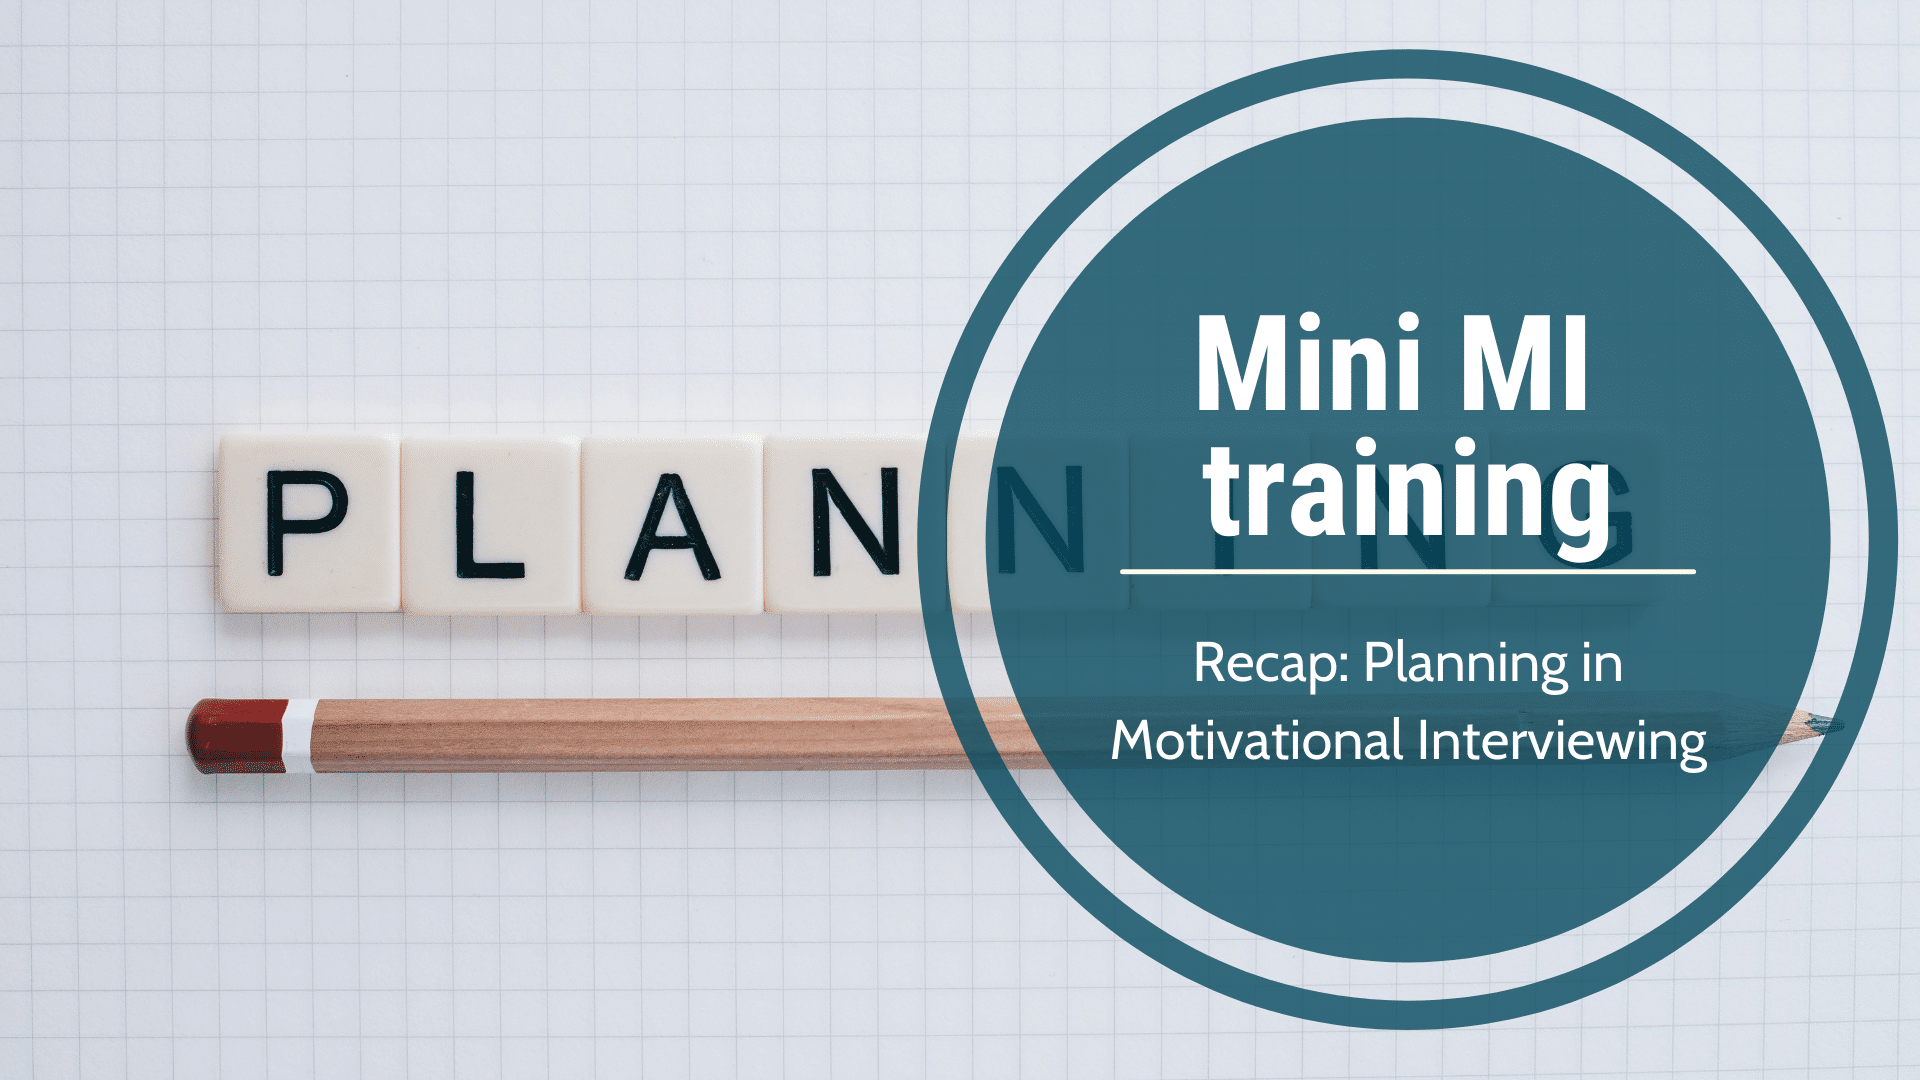 Live Mini MI training: Planning in Motivational Interviewing